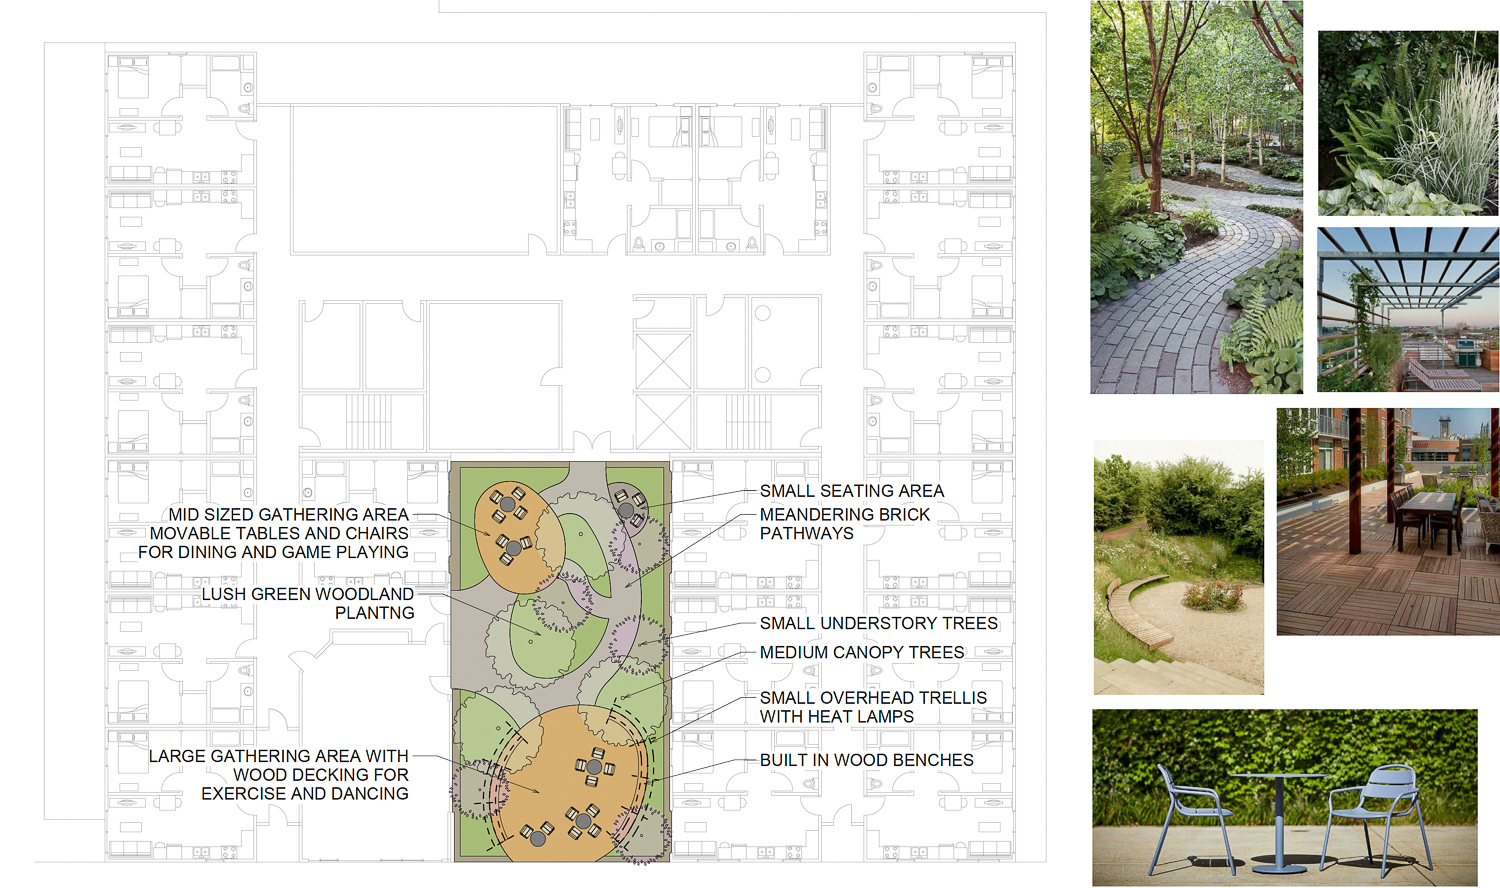 1003 East 15th Street landscaping on level three, floor plan by MWA Architects